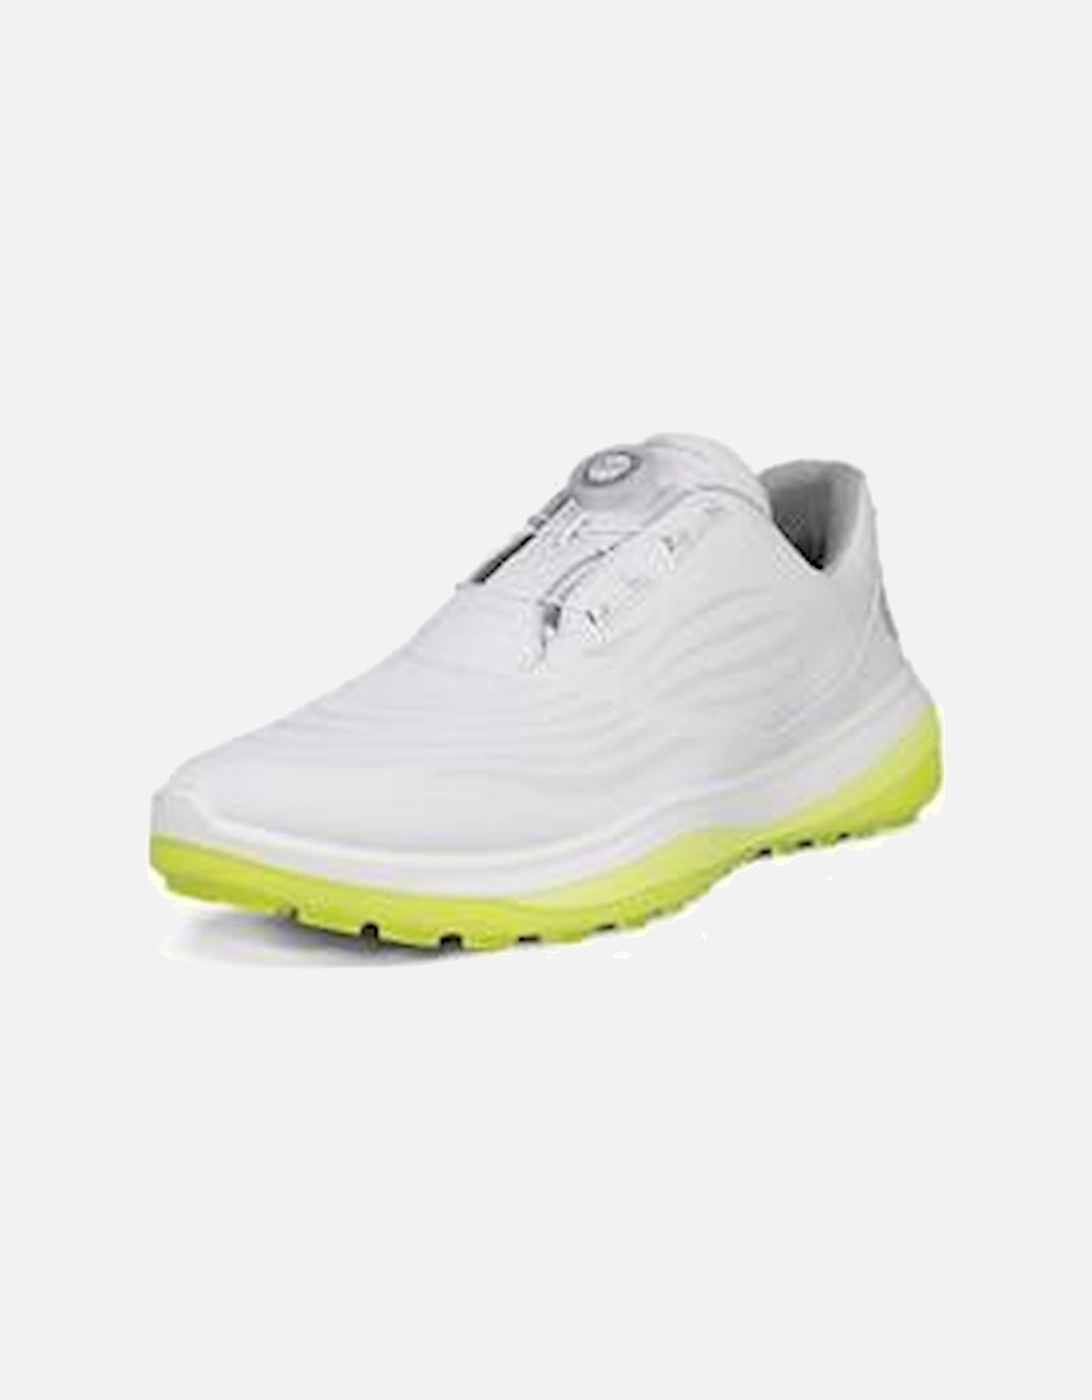 Golf Lt1 132274-01007 in white leather, 10 of 9